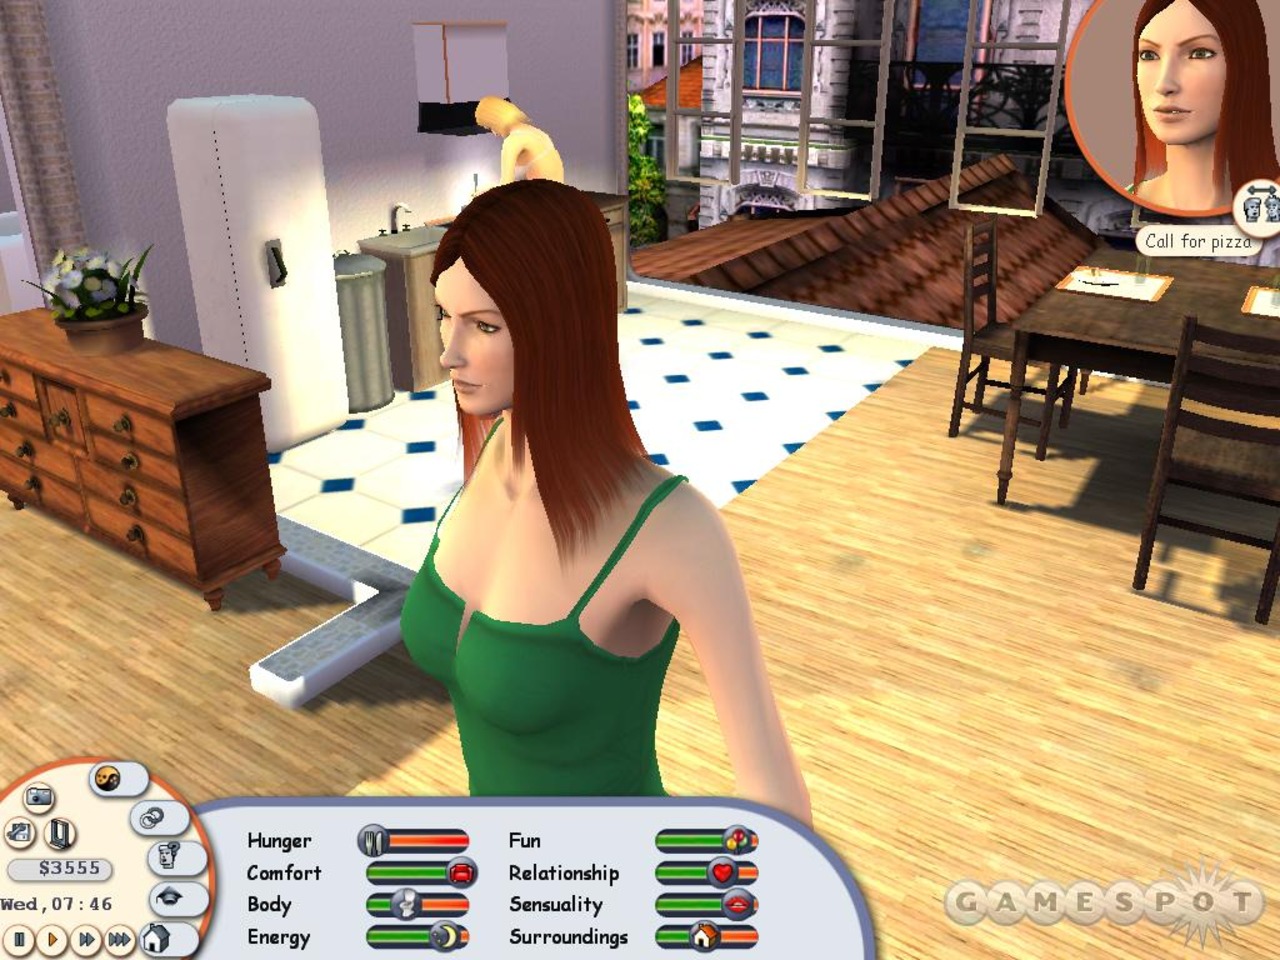 A femme looking person standing in a kitchen. A menu with stats is shown beneath them.